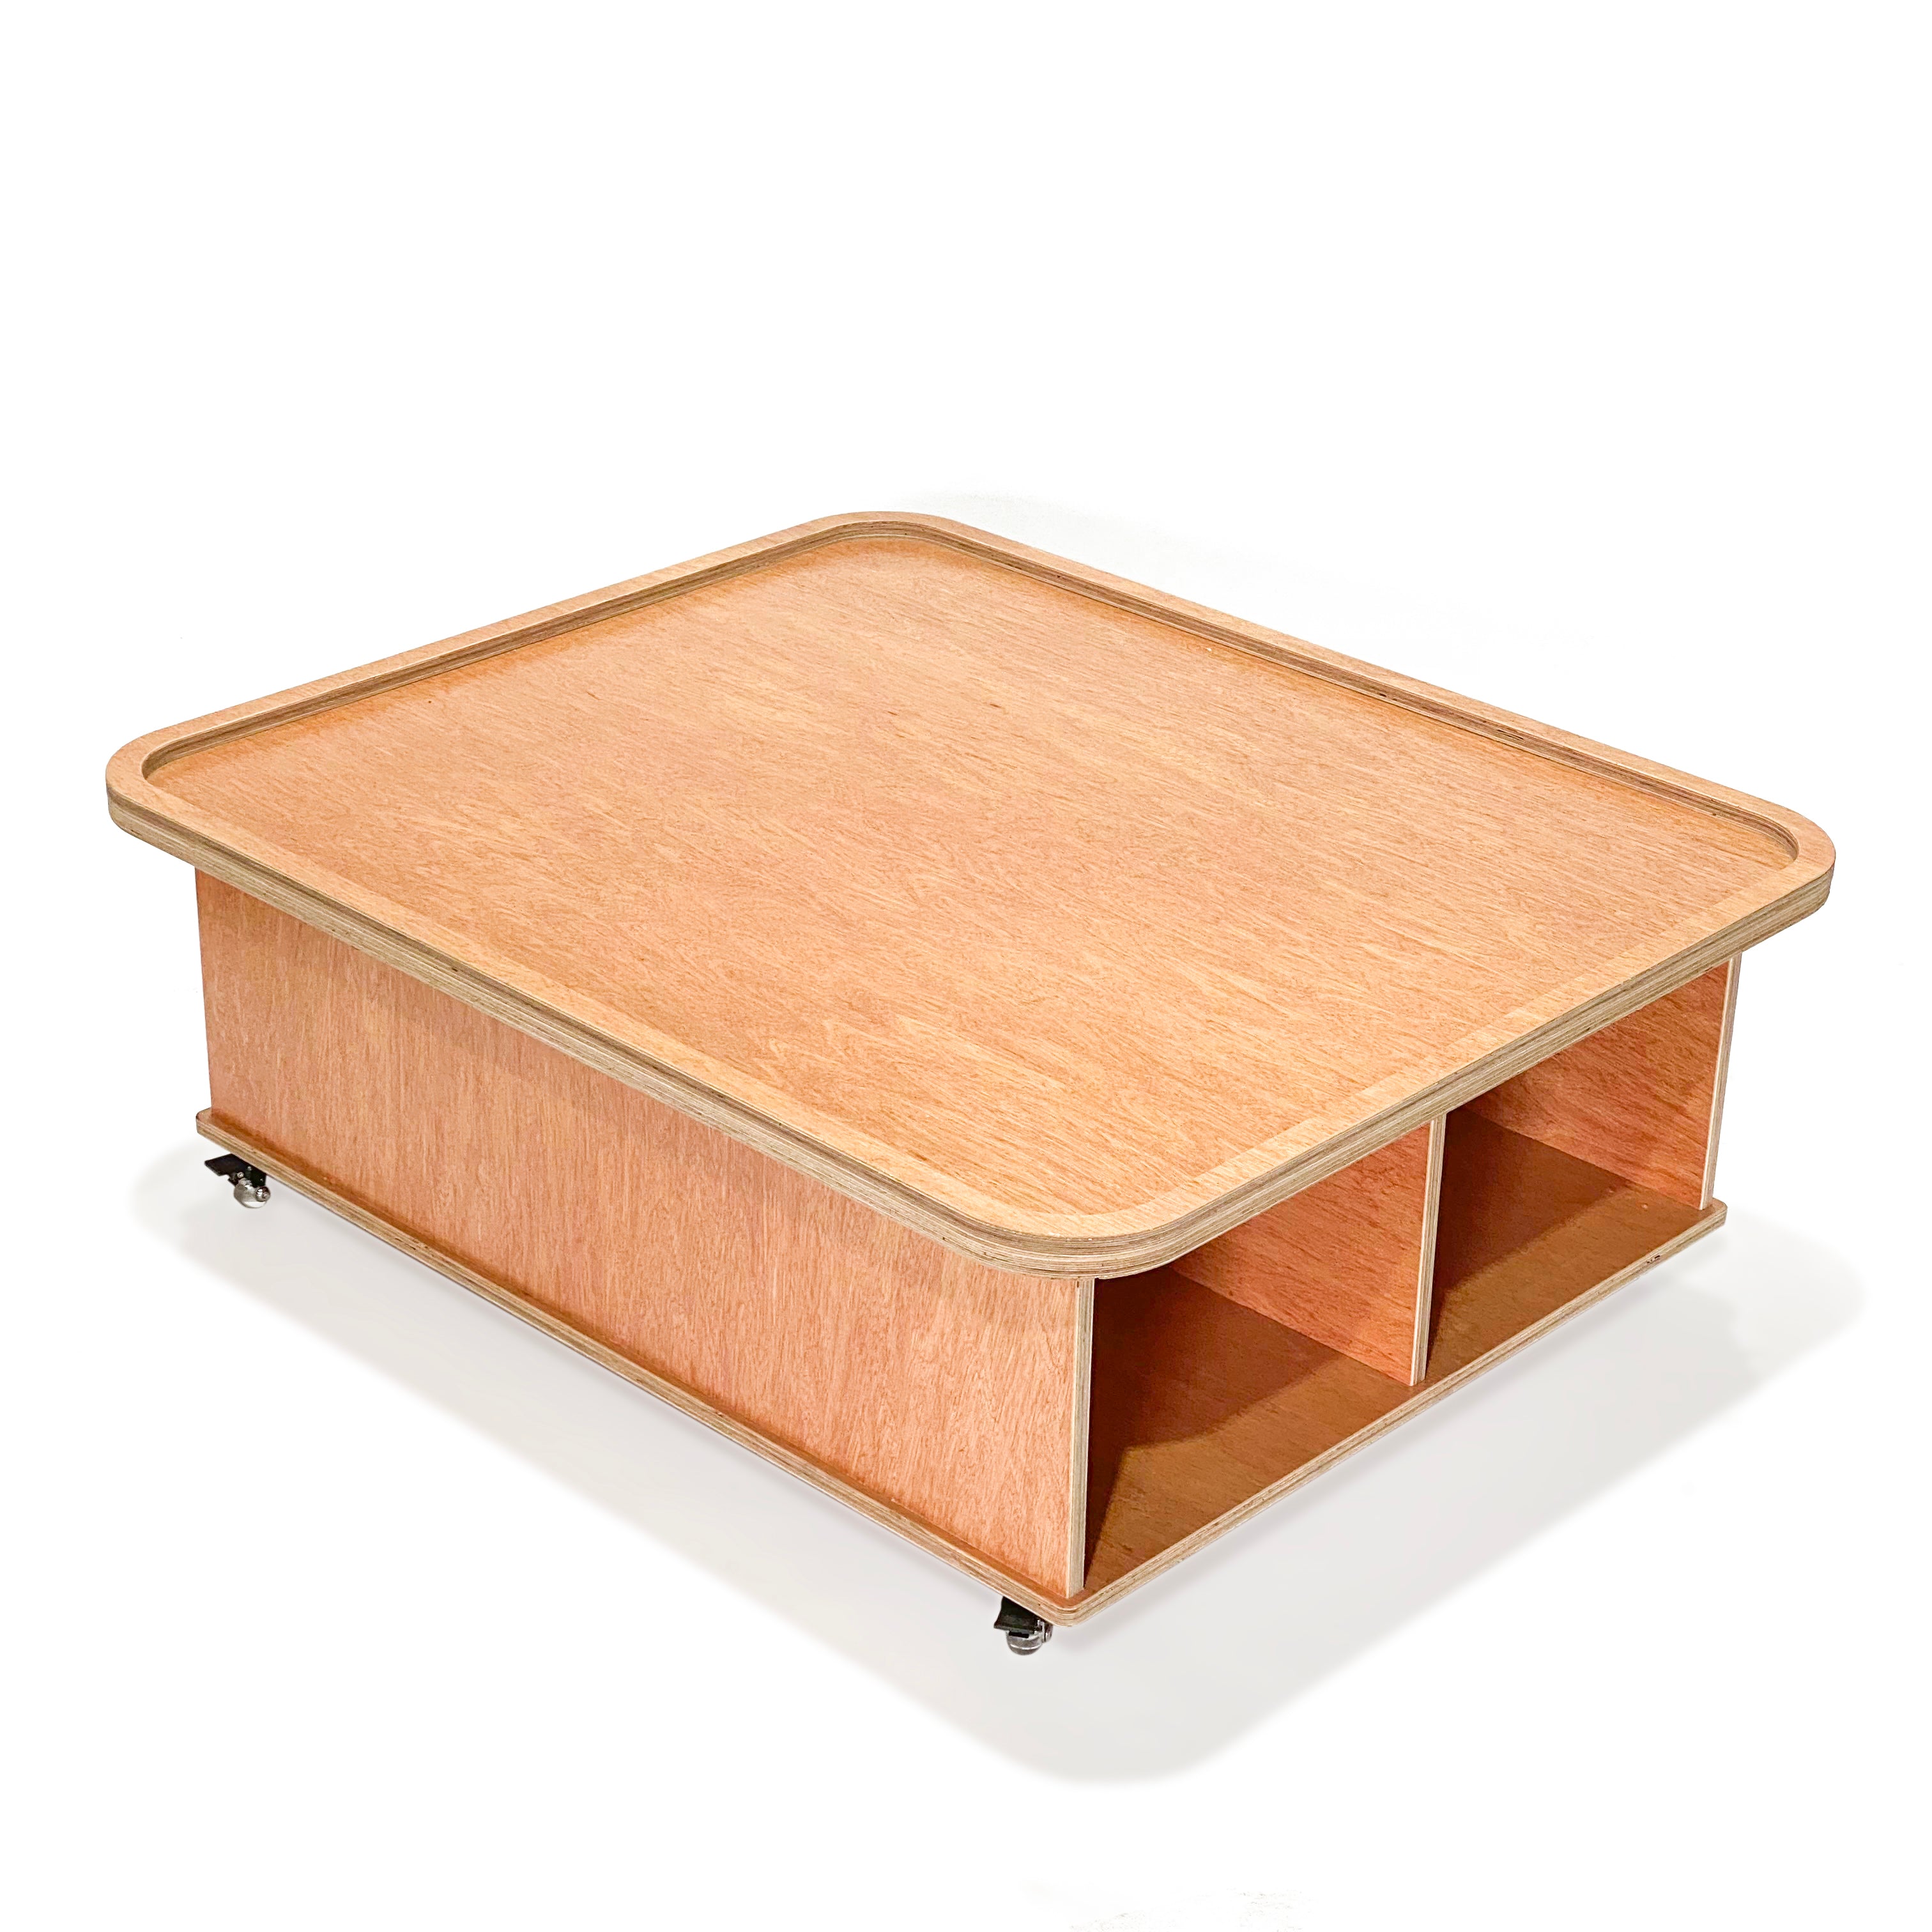 Play Table with Storage